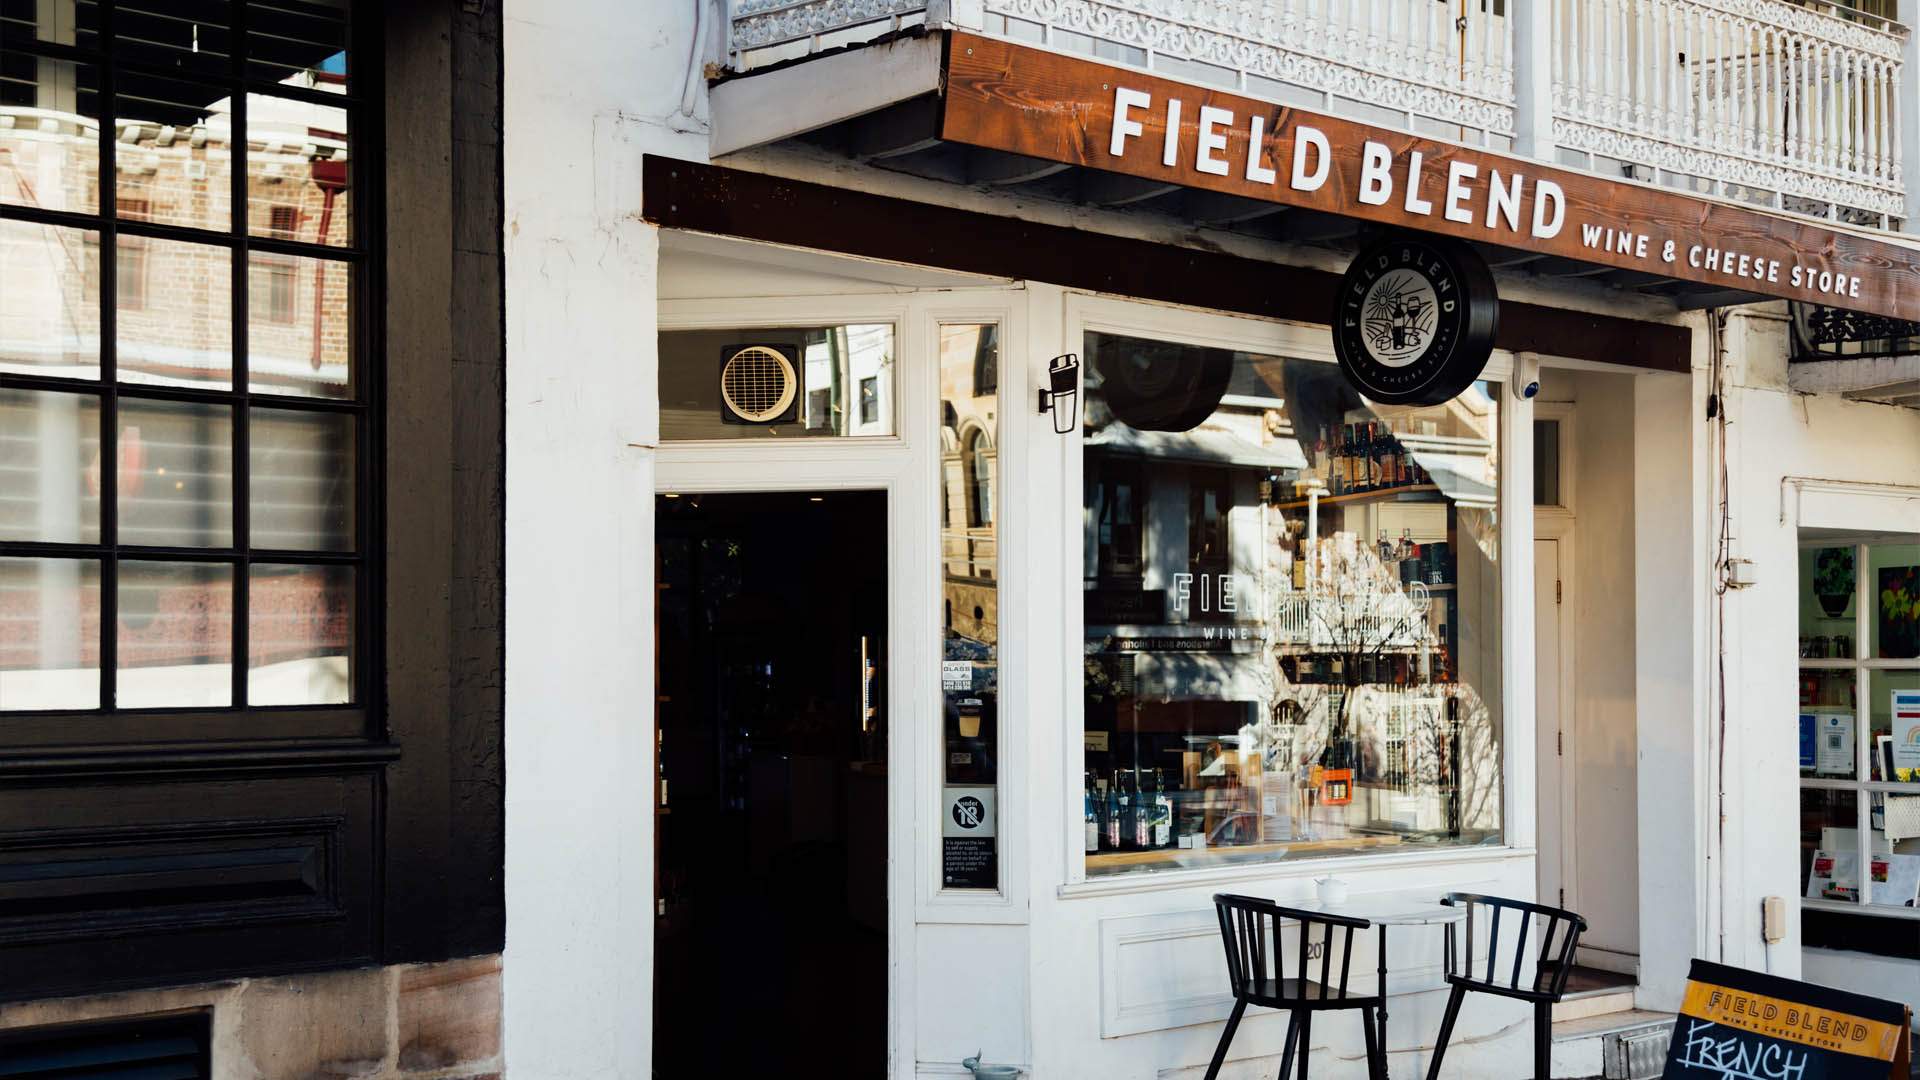 Field Blend Wine & Cheese Store